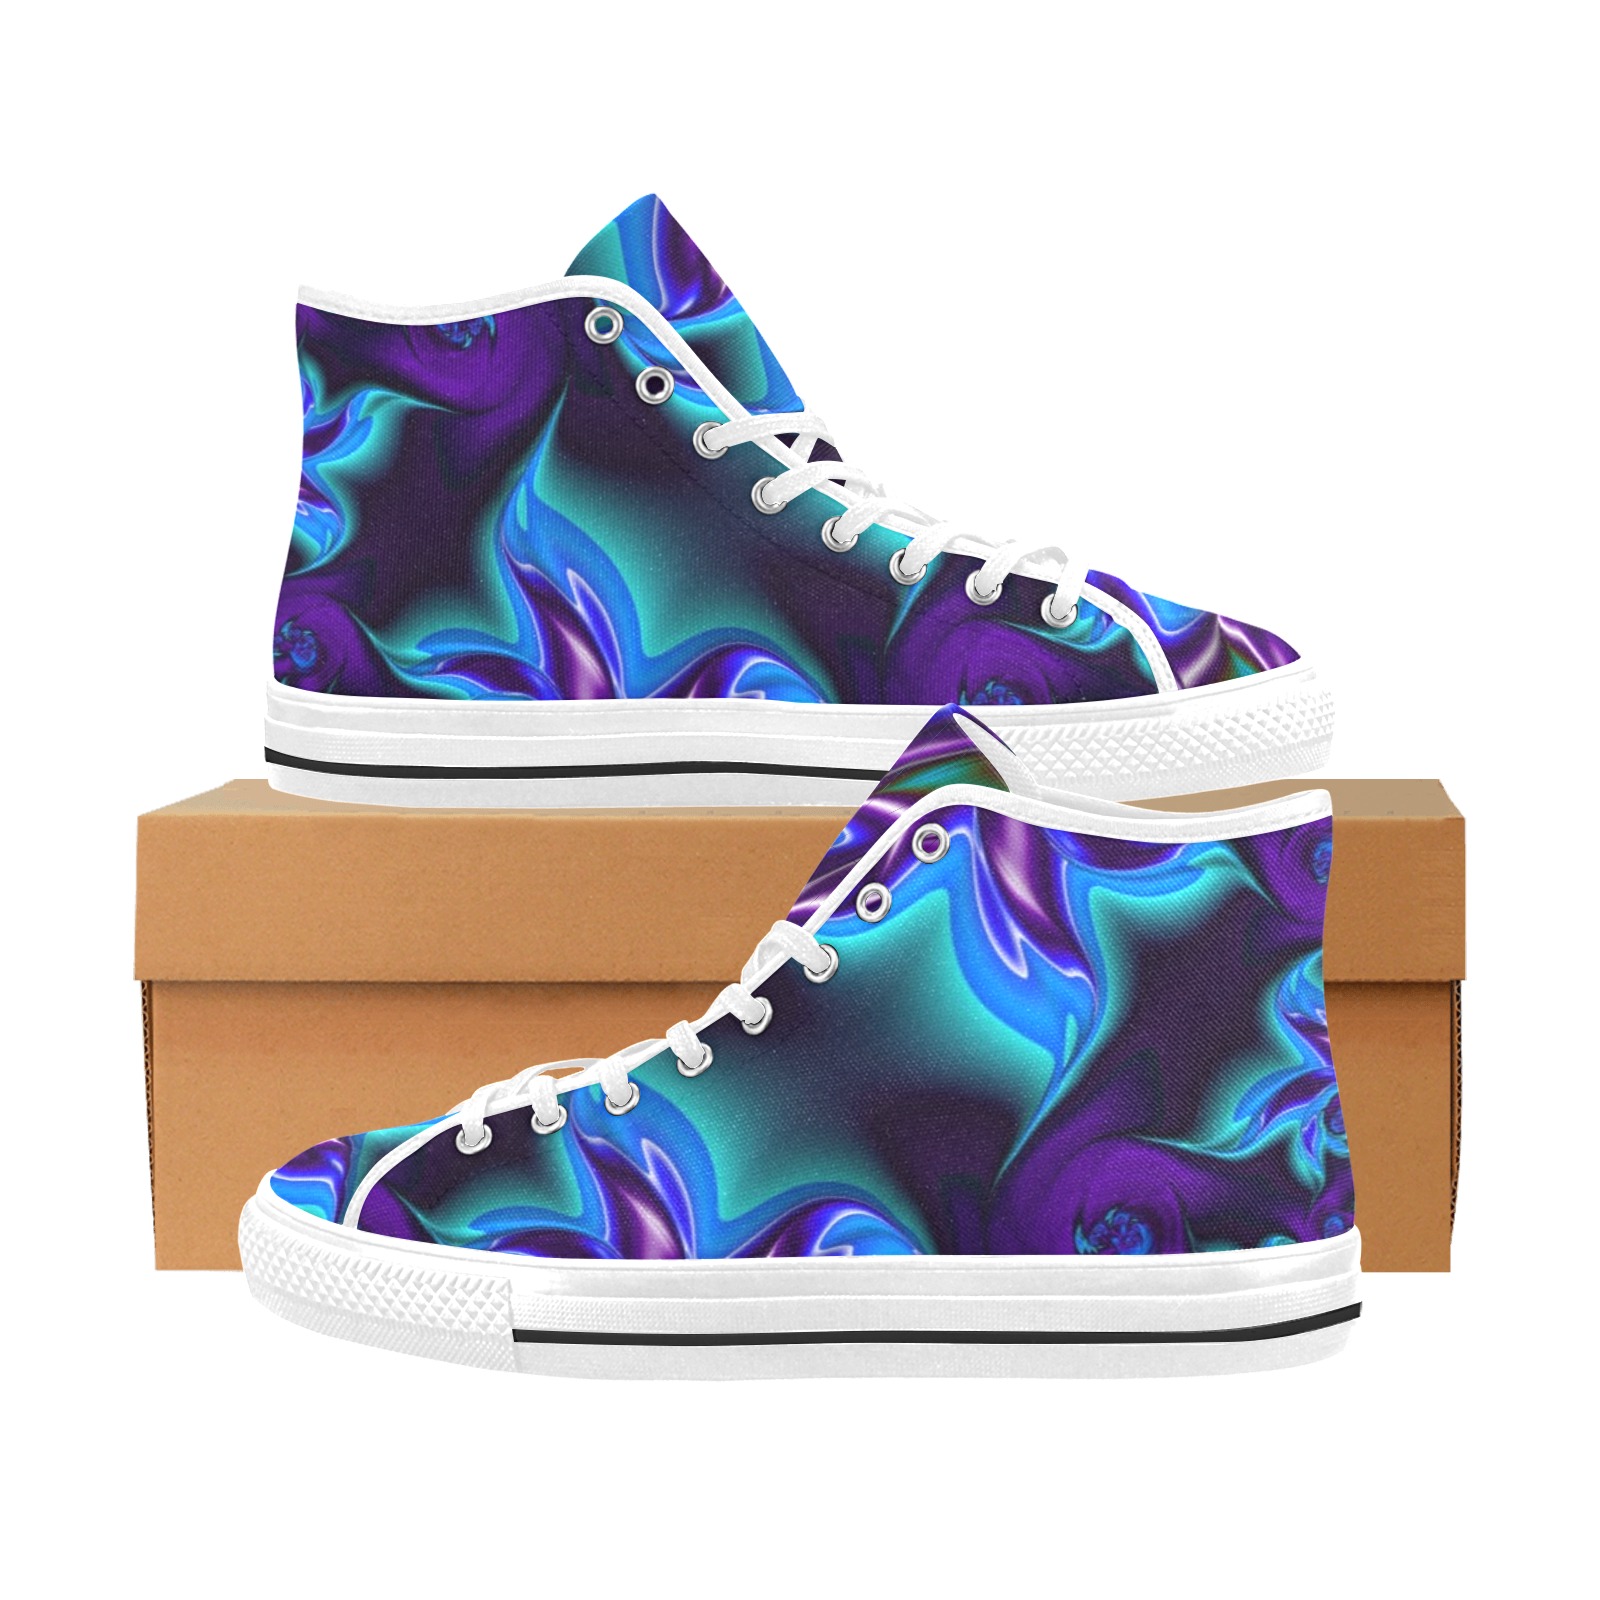 Aqua Blue and Purple Flowers Fractal Abstract Vancouver H Women's Canvas Shoes (1013-1)